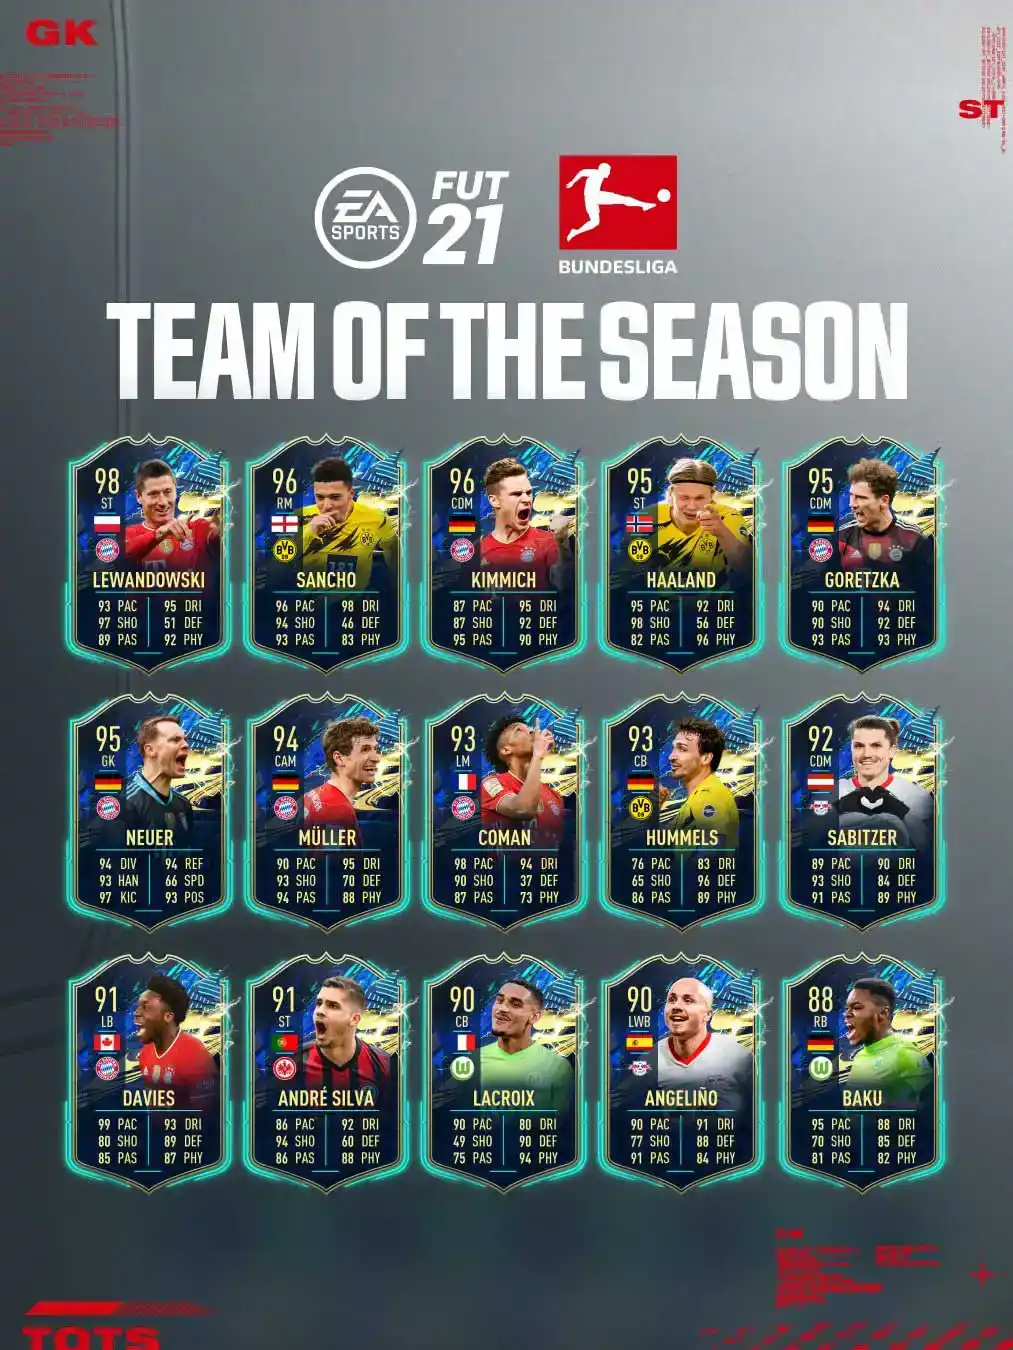 Romance Third Indifference FIFA 22 Bundesliga TOTS - Official Squad